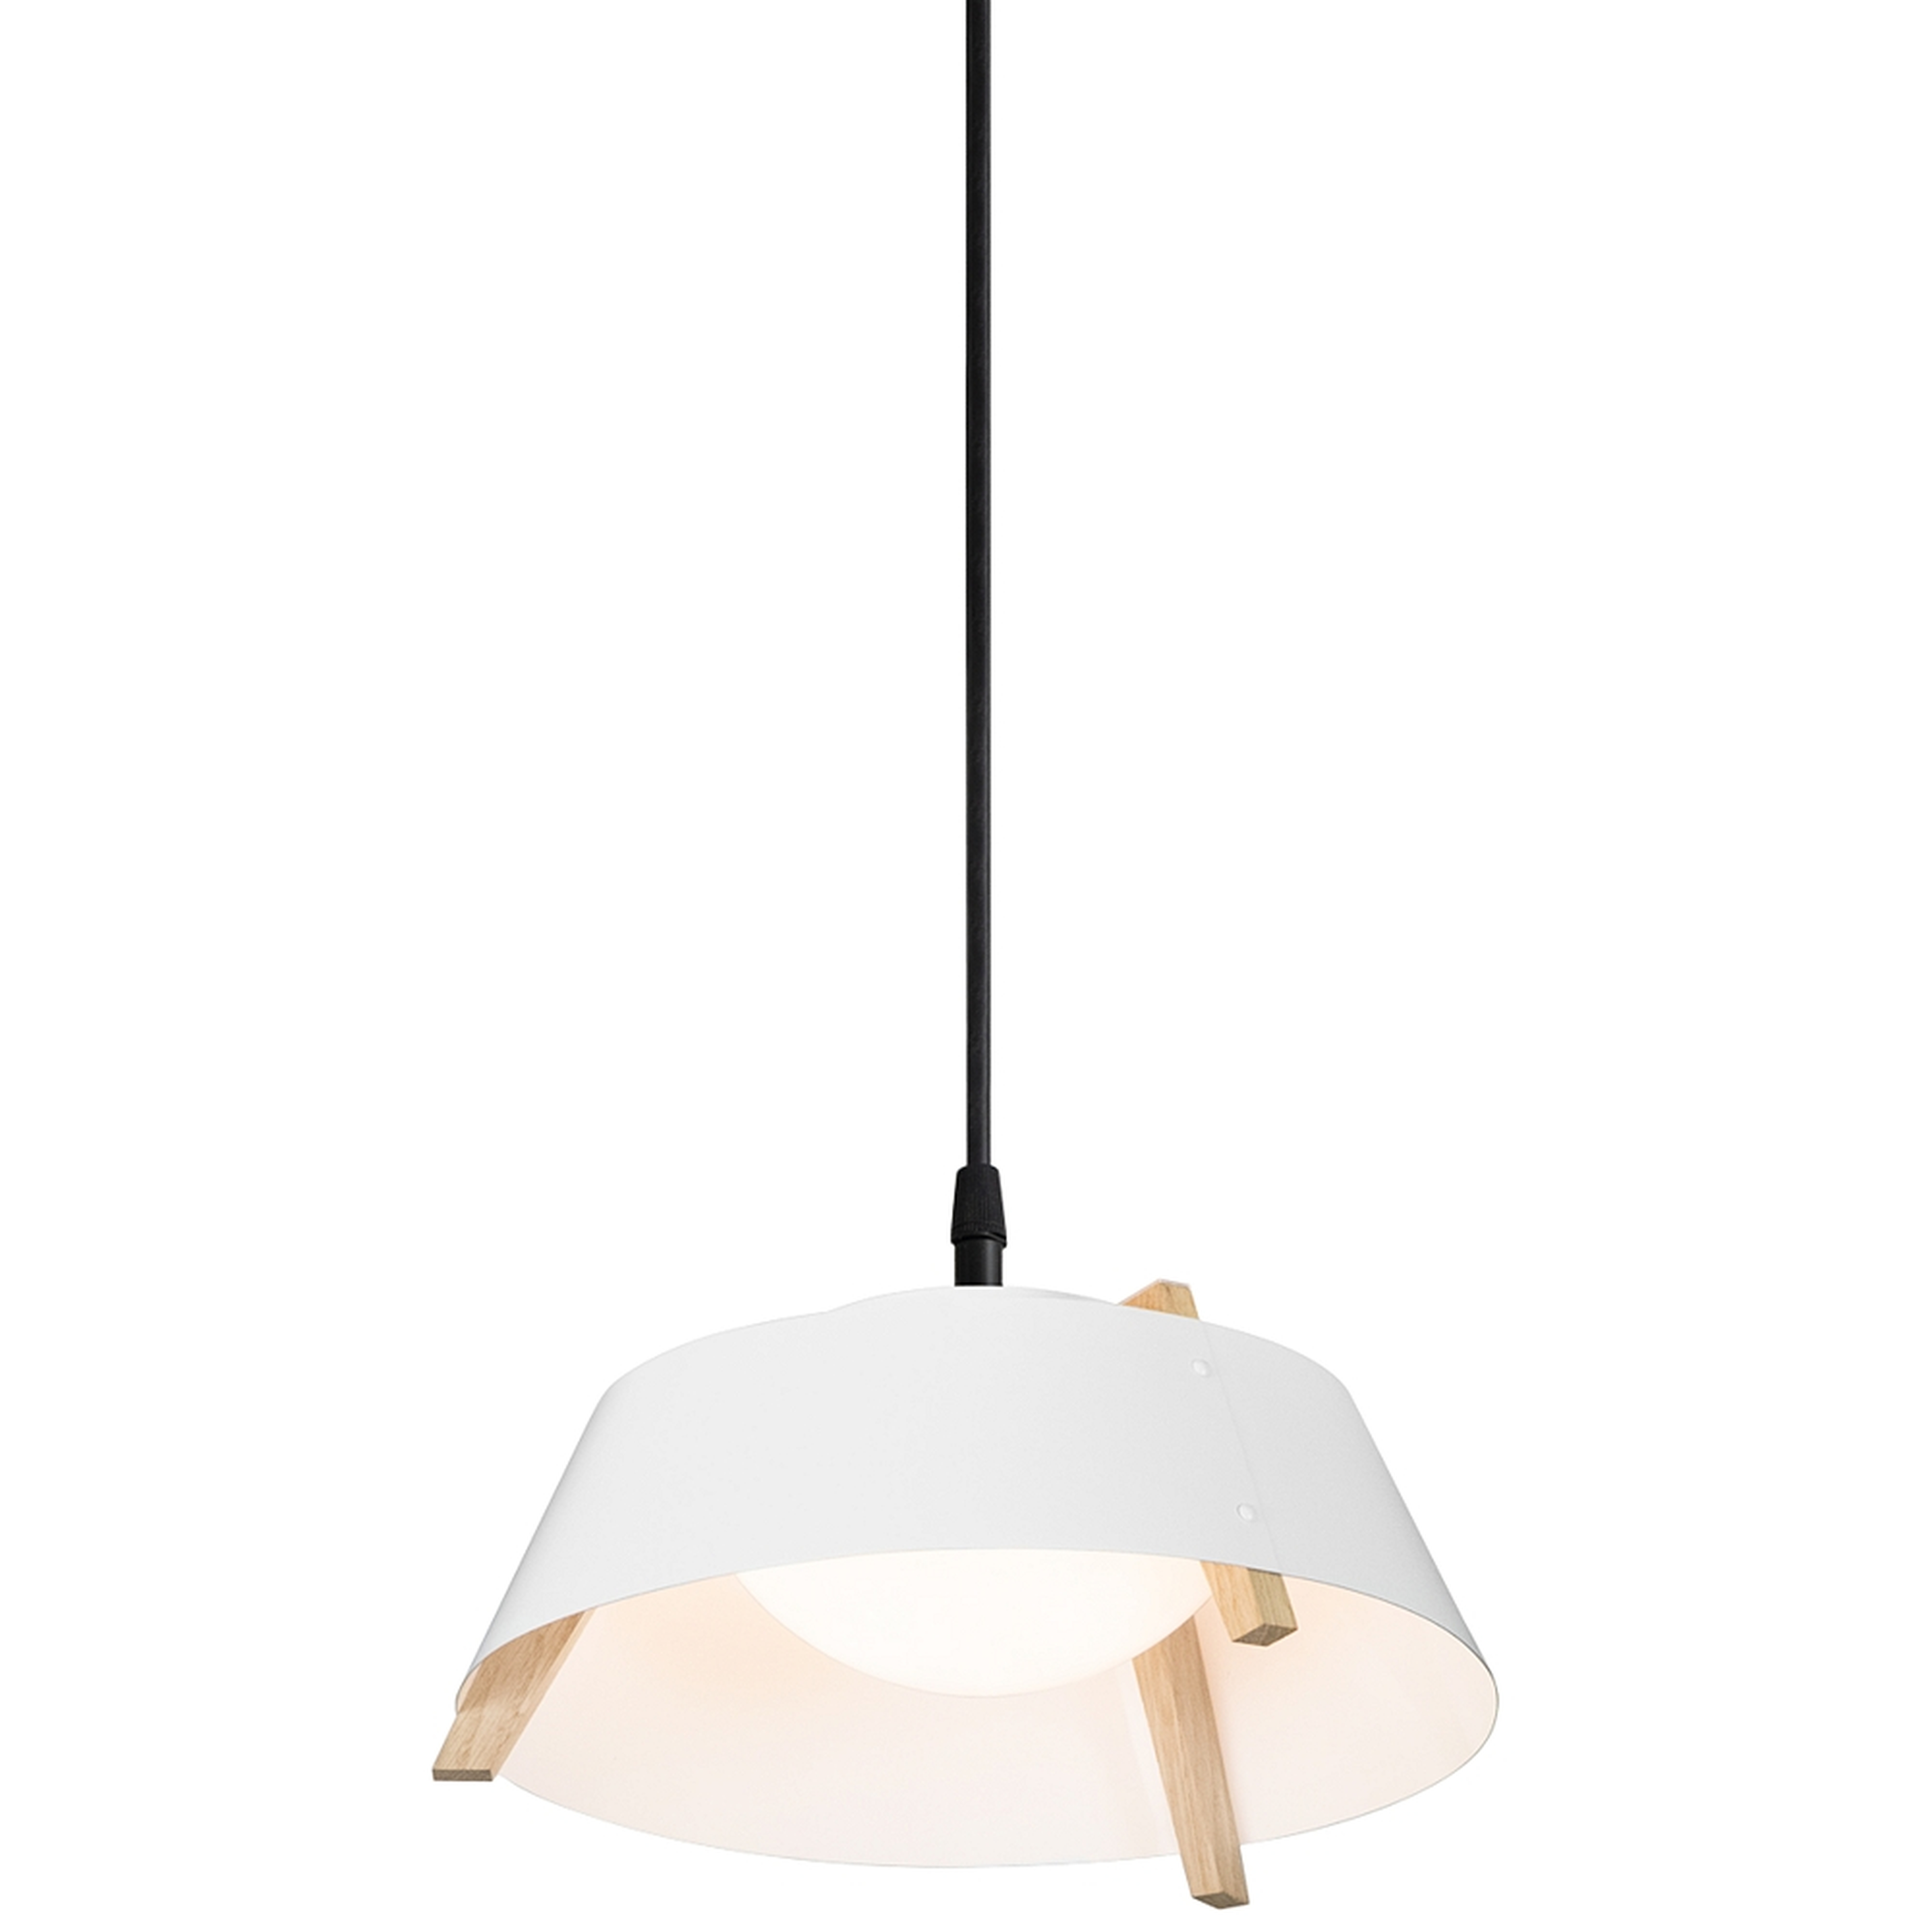 Cerno Casia 14 1/4" Wide White and Oak LED Pendant Light - Style # 93Y69 - Lamps Plus